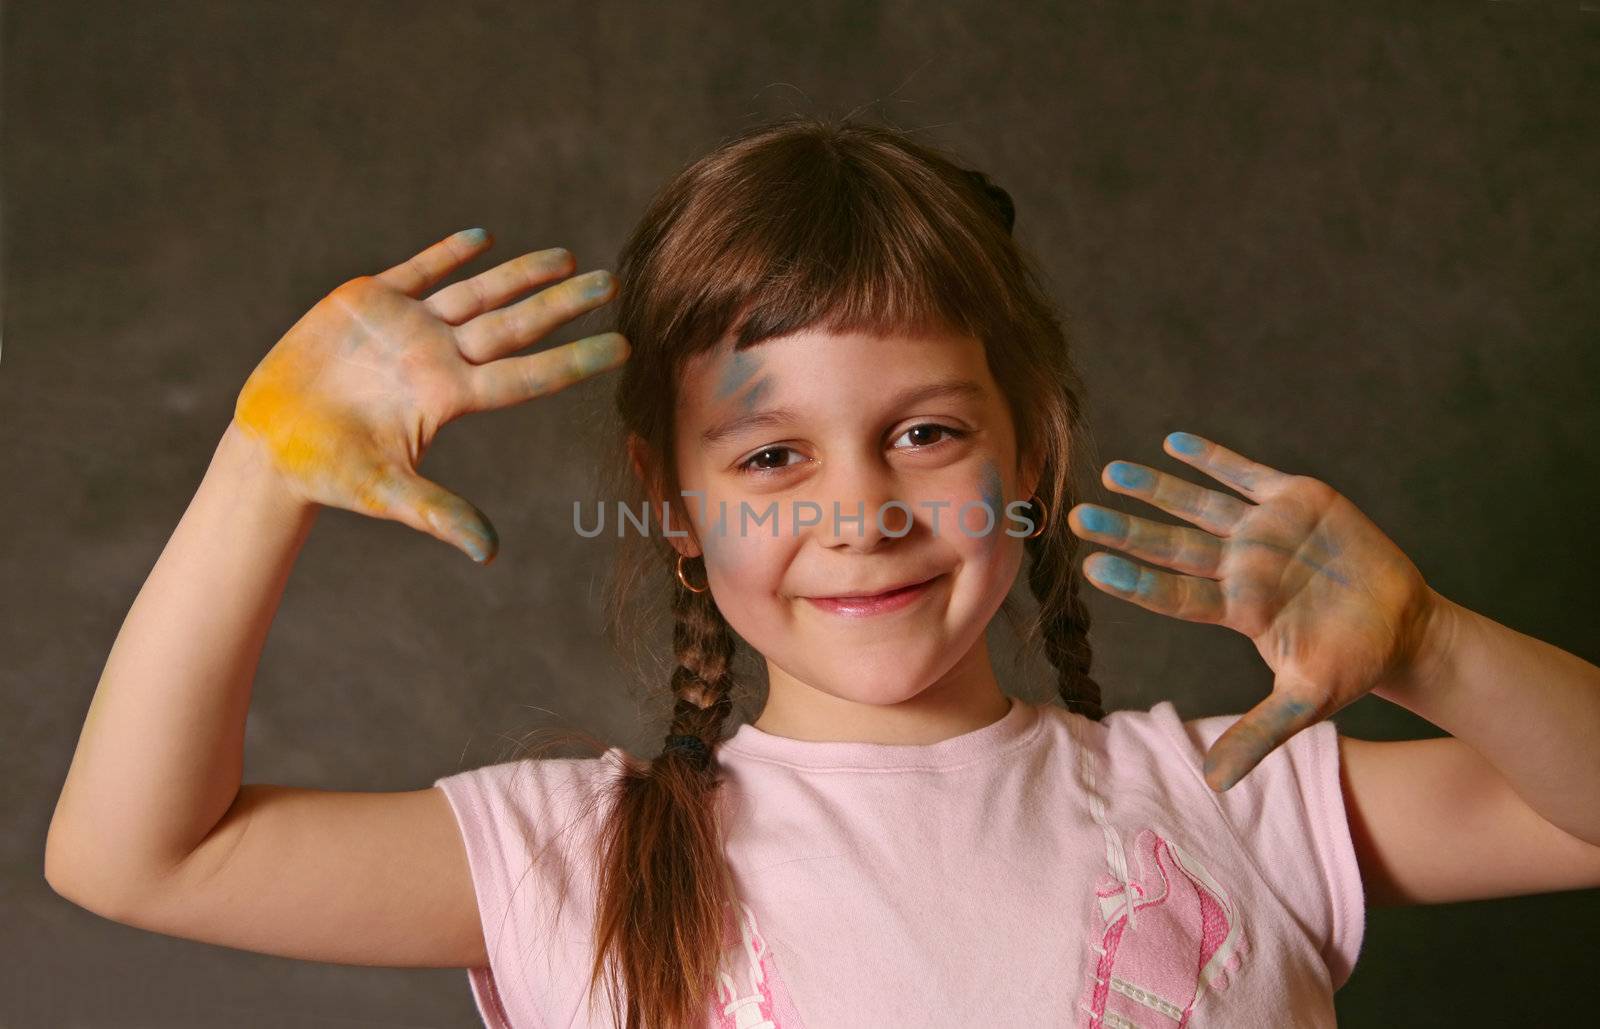 The good little girl. Hands and the face are soiled in a paint